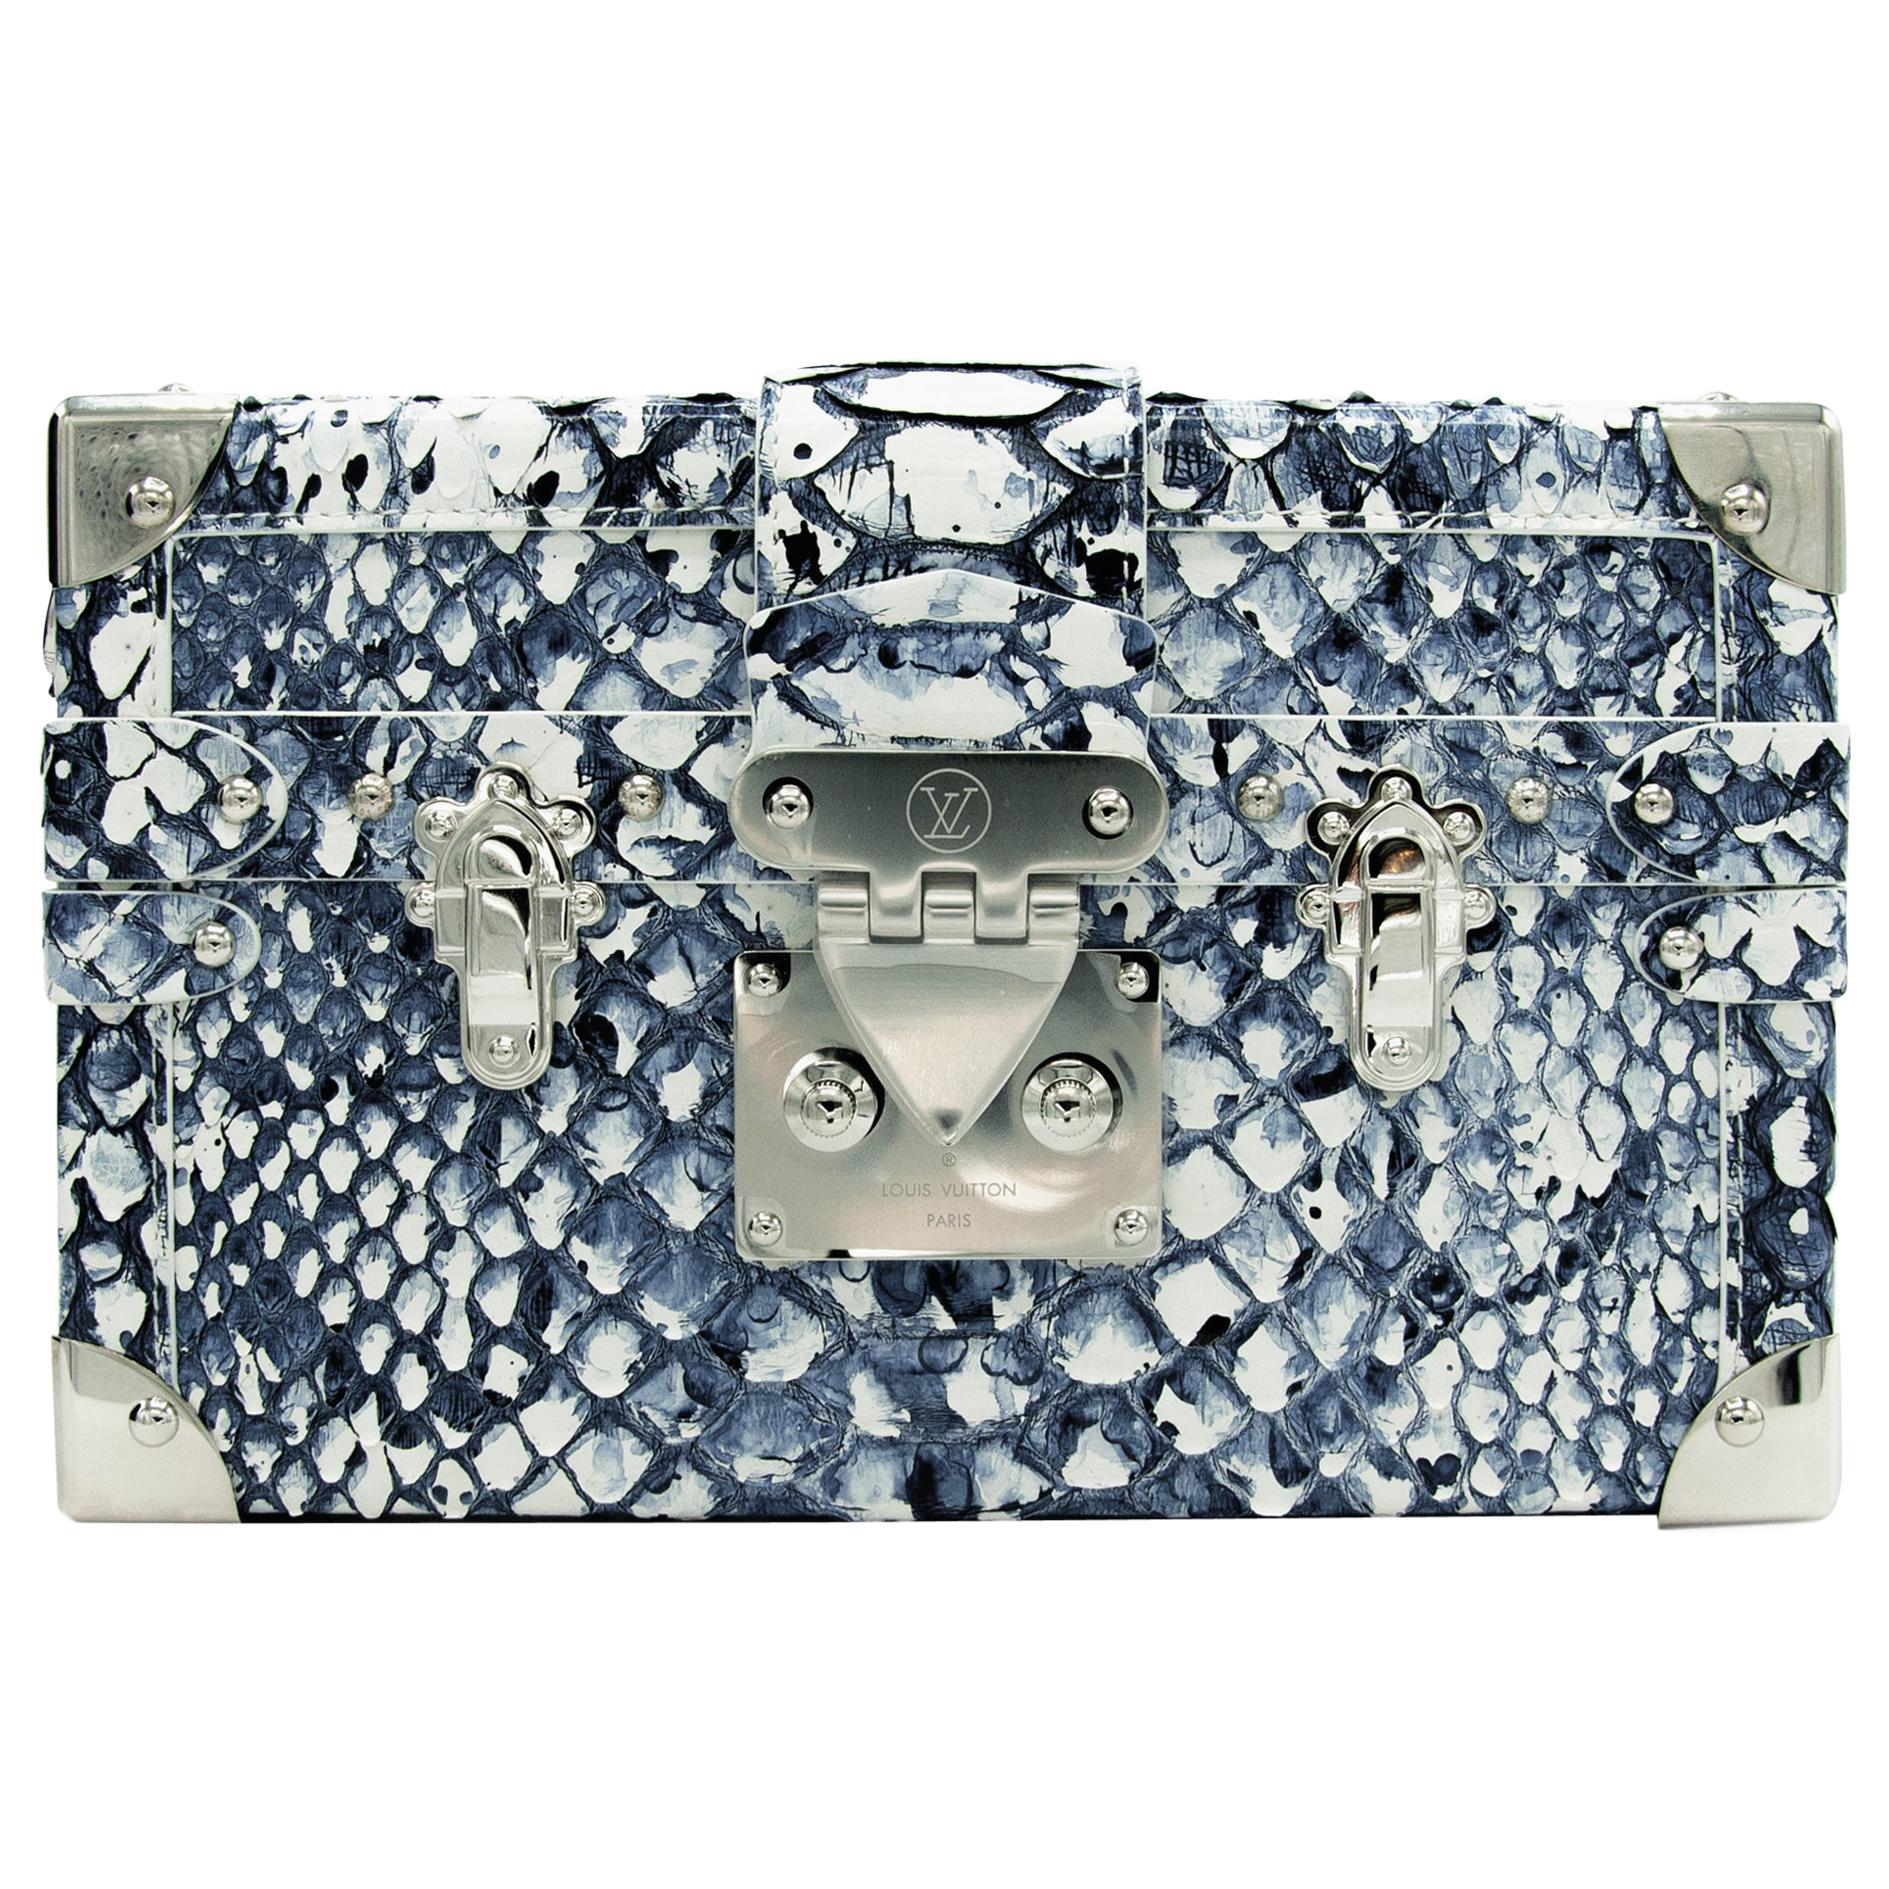 Cute Handbags for Women: Petite Malle Collection